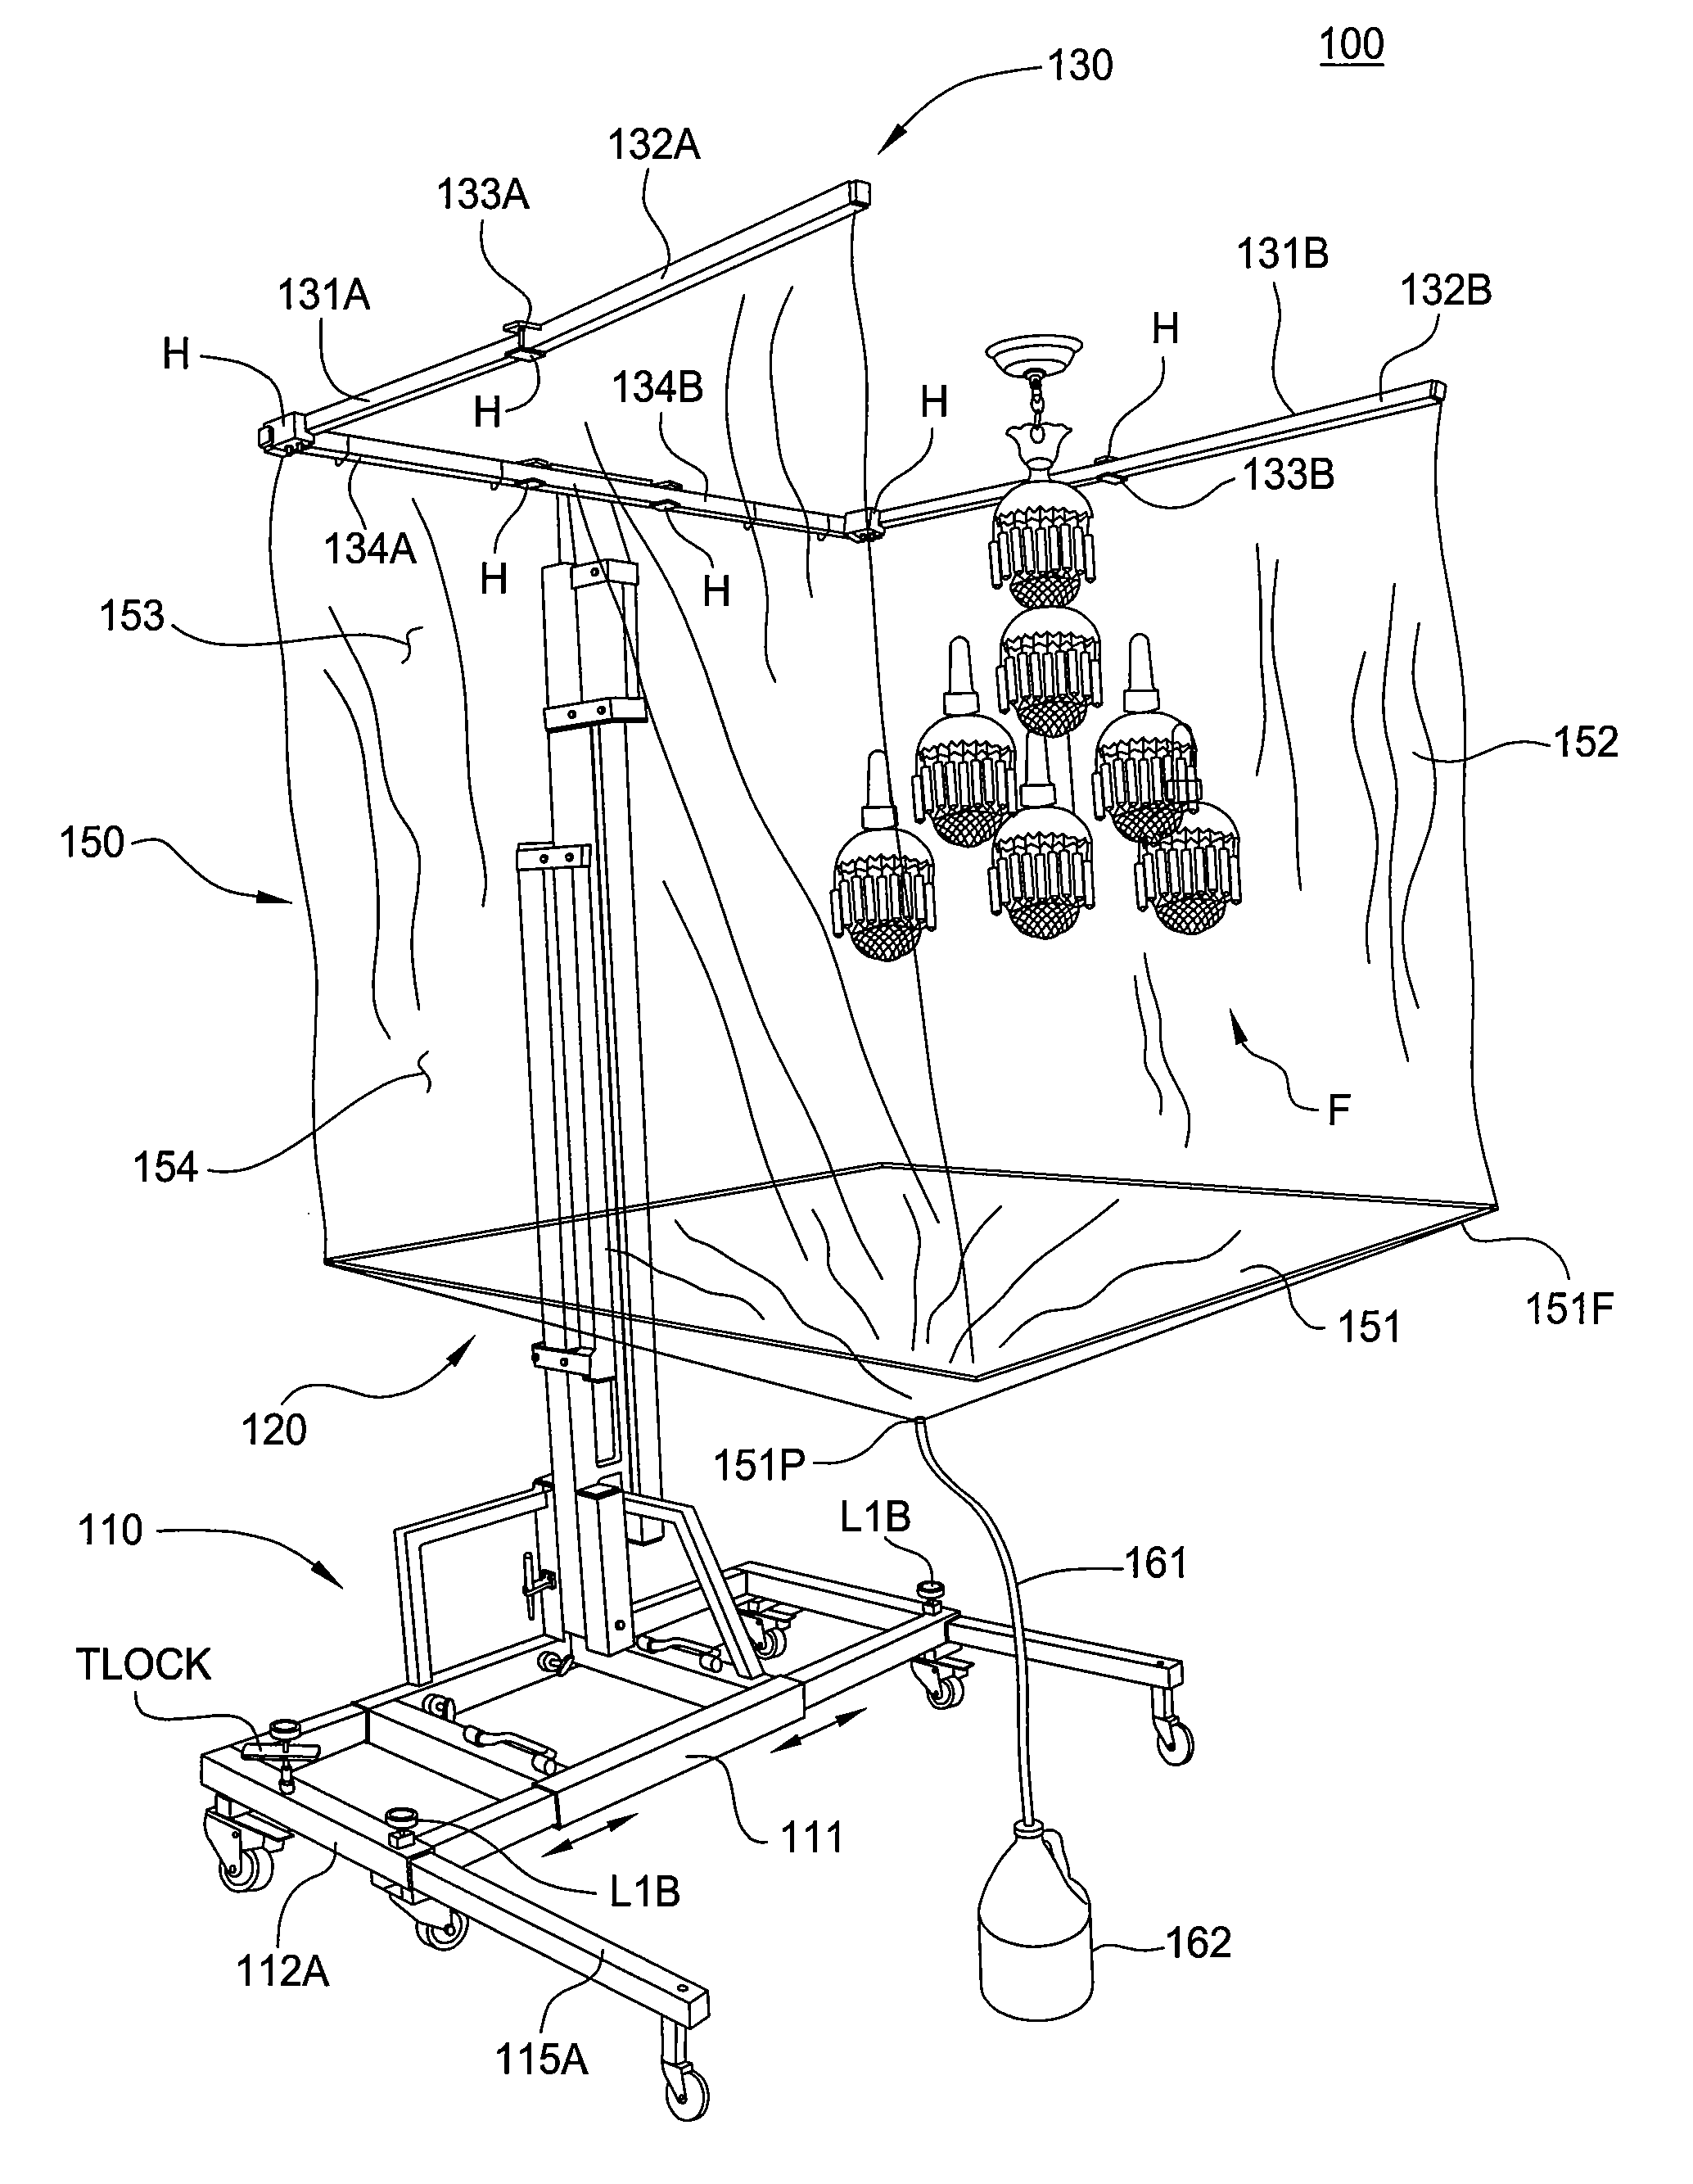 Apparatus for shielding an elevated fixture